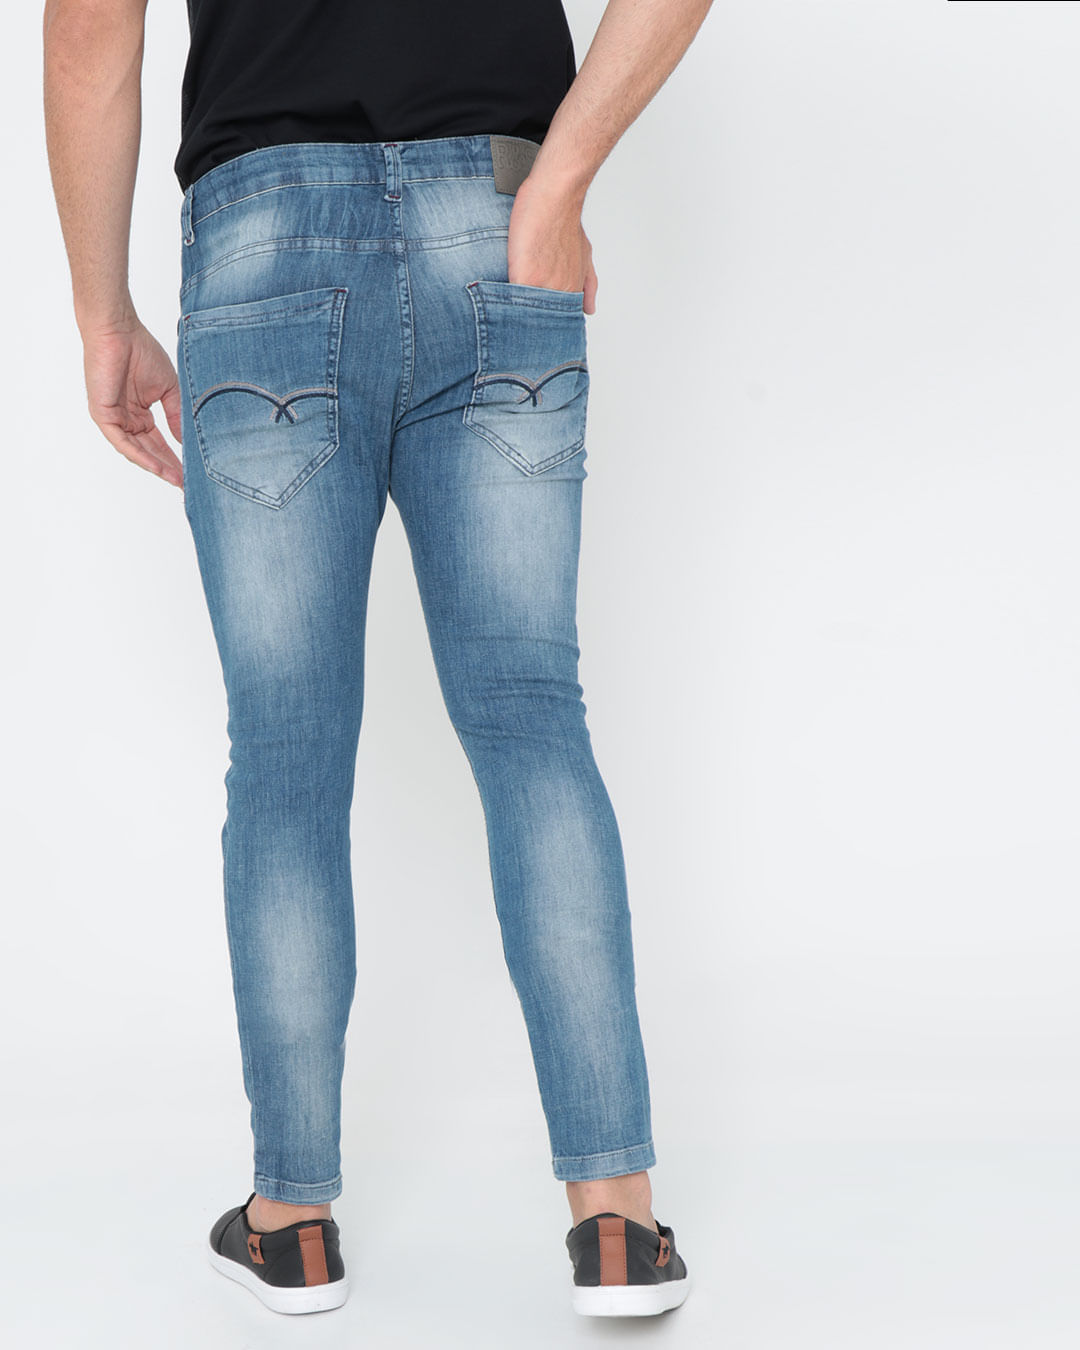 Calca-Jeans-Masculina-Skinny-Destroyed-Azul